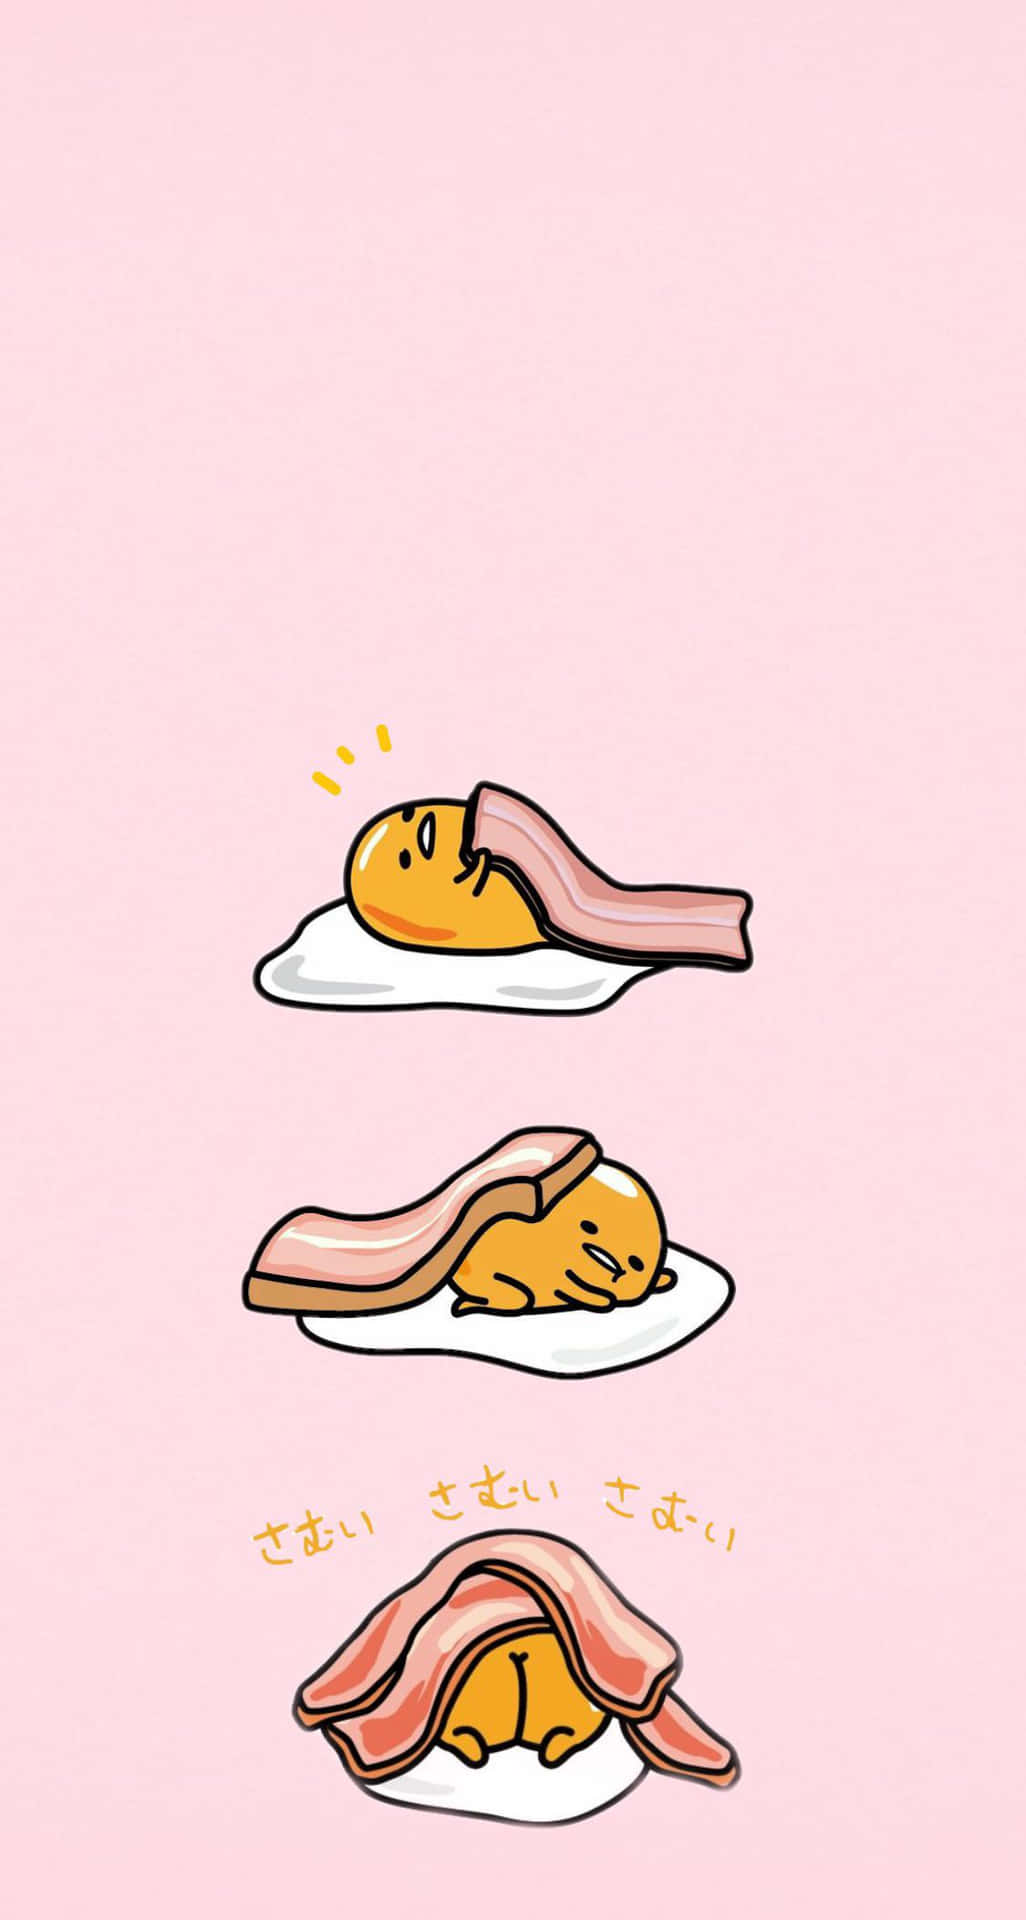 Upgrade your tech game with Gudetama Phone Wallpaper